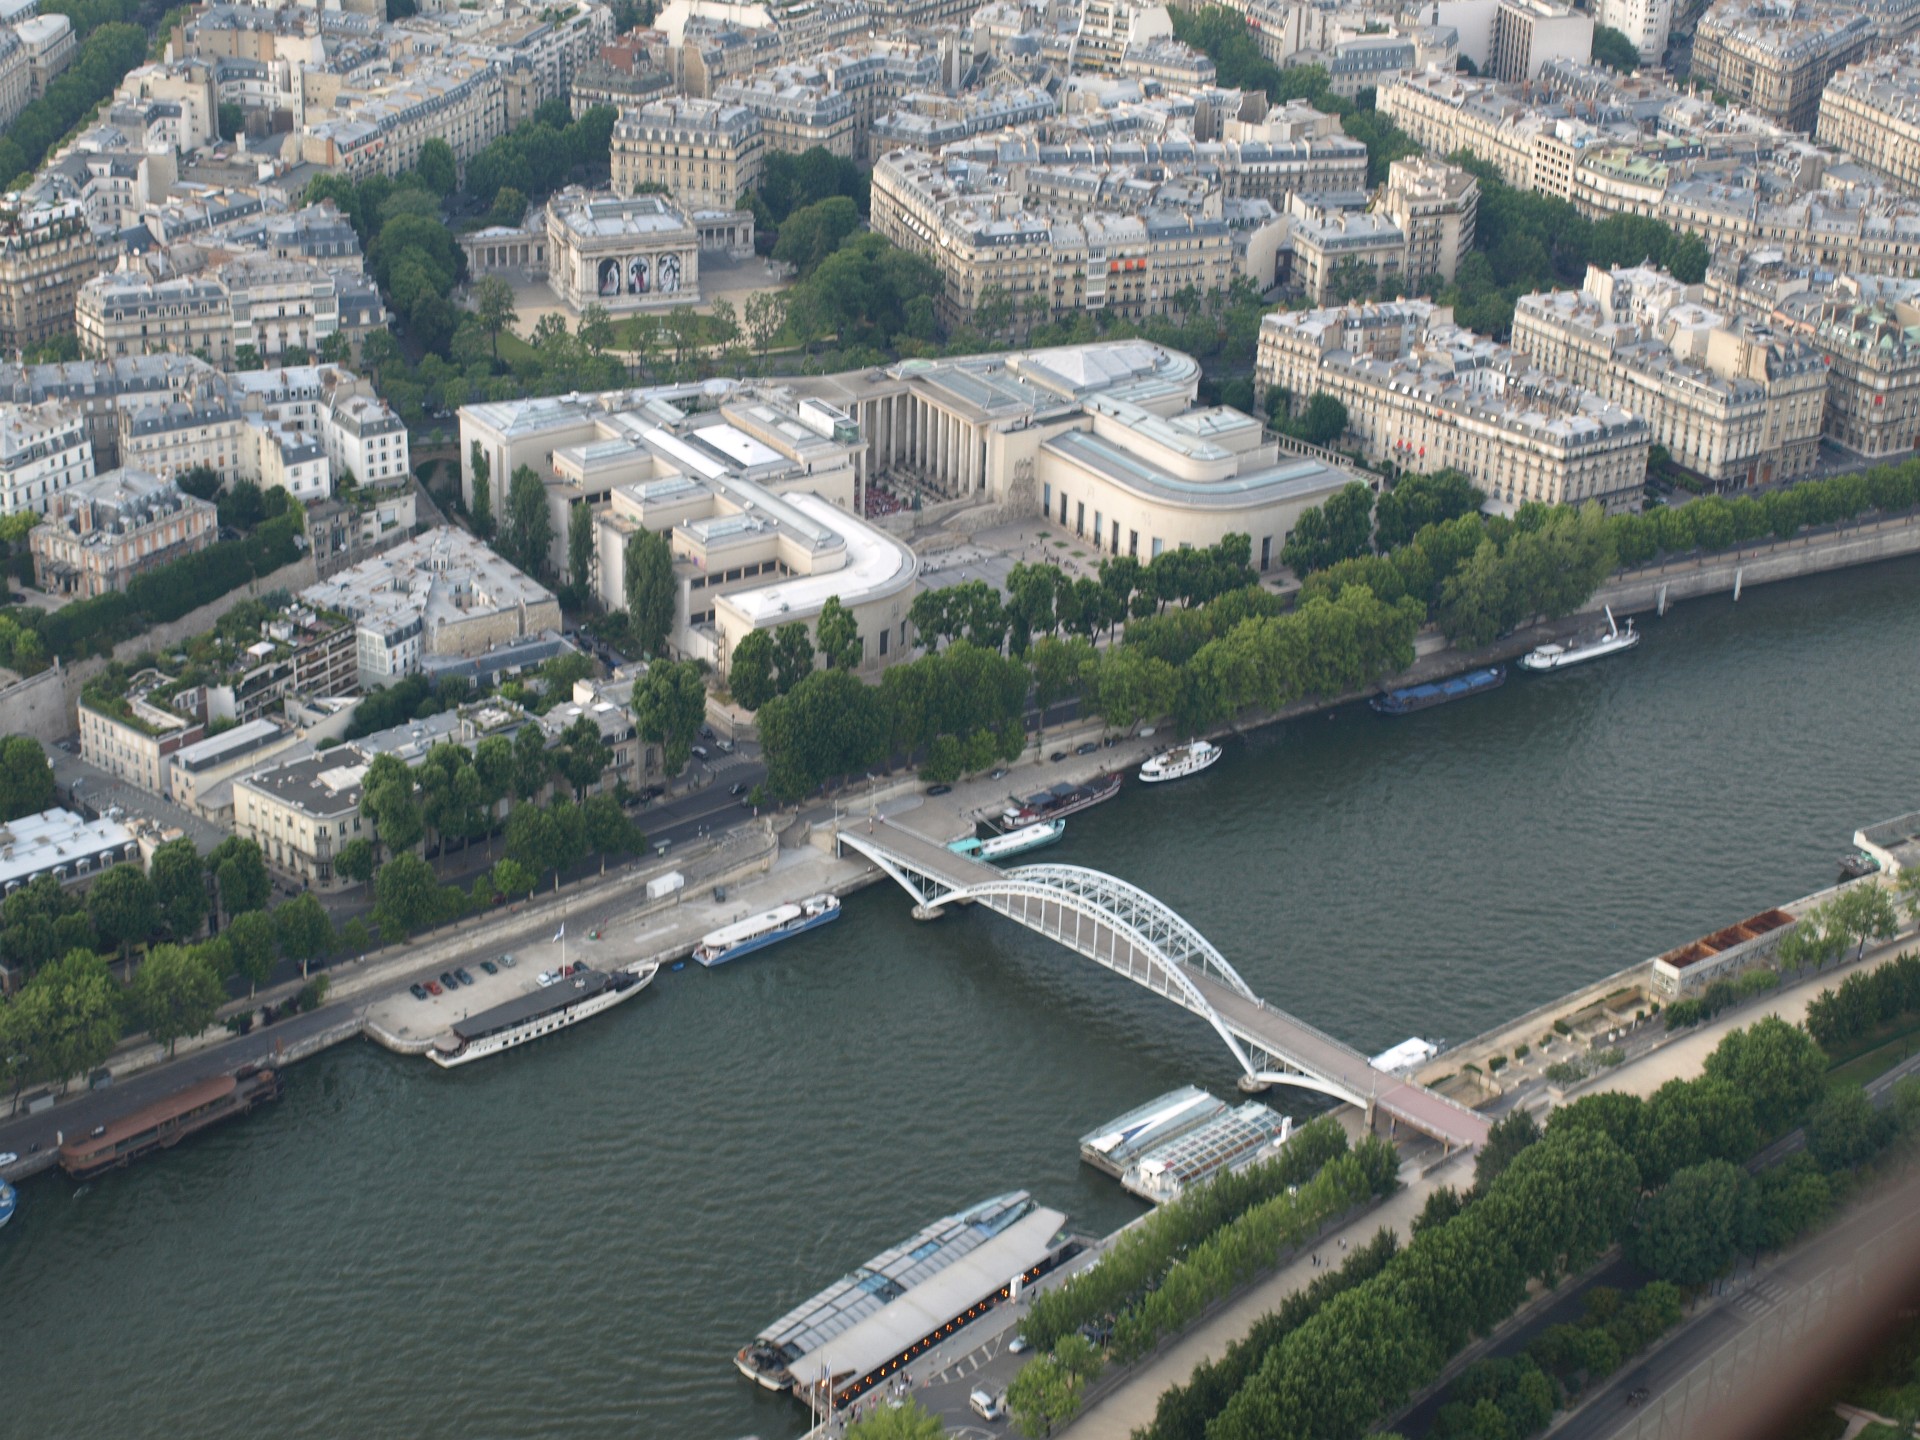 Looking Down on the Seine From the Third Floor of the Tower